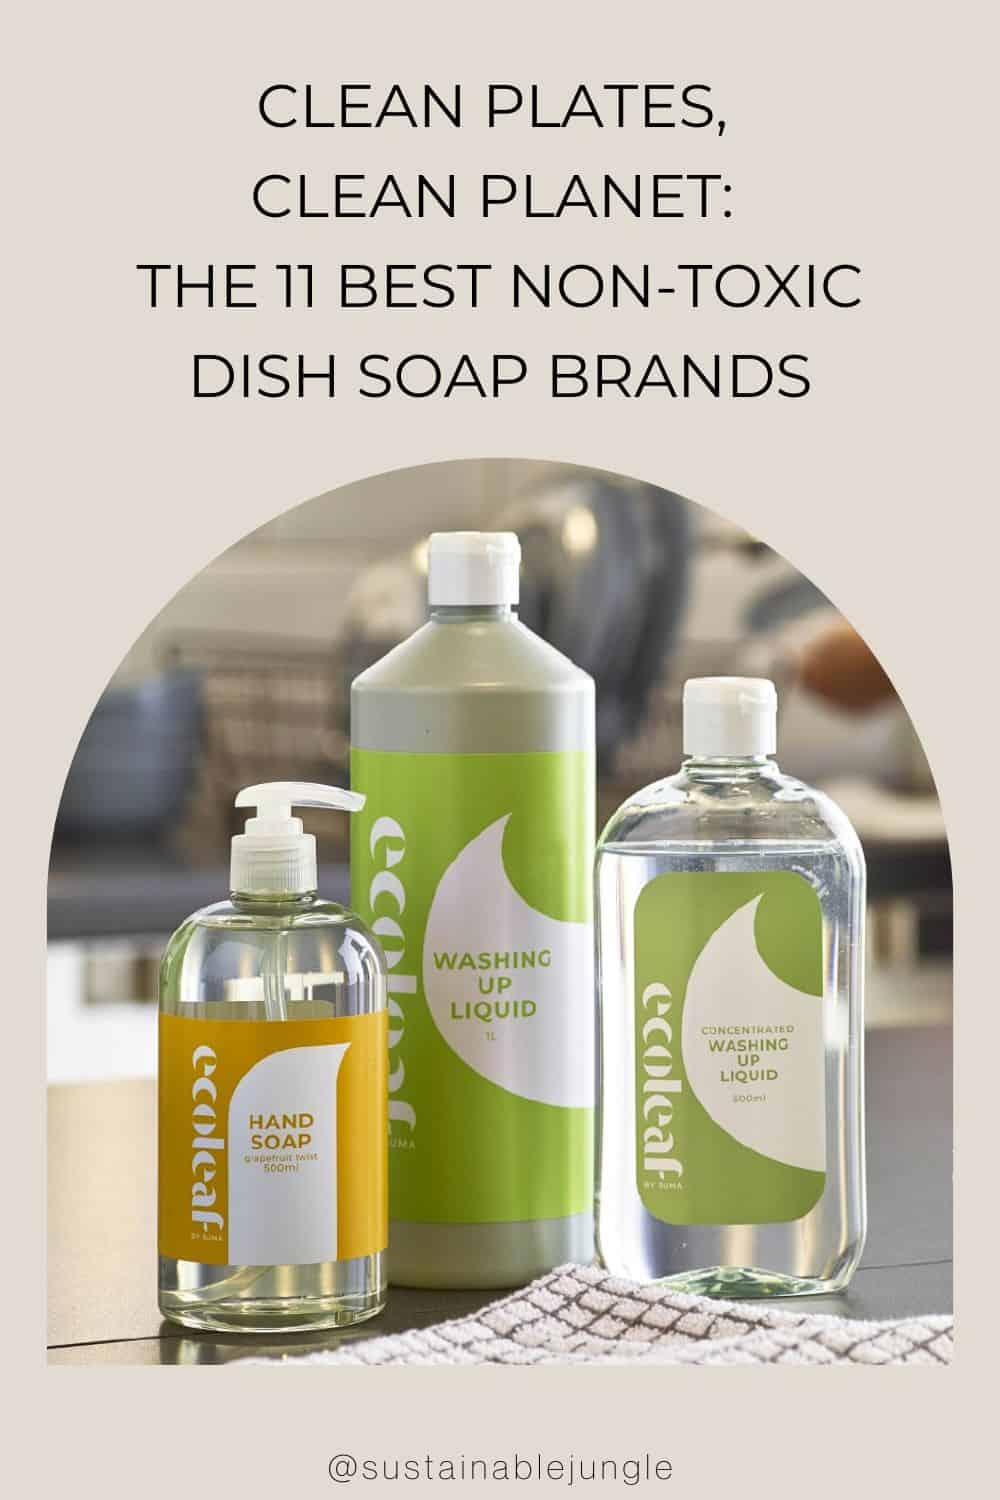 Clean Plates, Clean Planet: The 11 Best Non-Toxic Dish Soap Brands Image by Ecoleaf #nontoxicdishsoap #bestnontoxicdishsoap #naturaldishsoap #nontoxicdishsoapbrands #allnaturaldishsoap #organicnaturaldishsoap #sustainablejungle